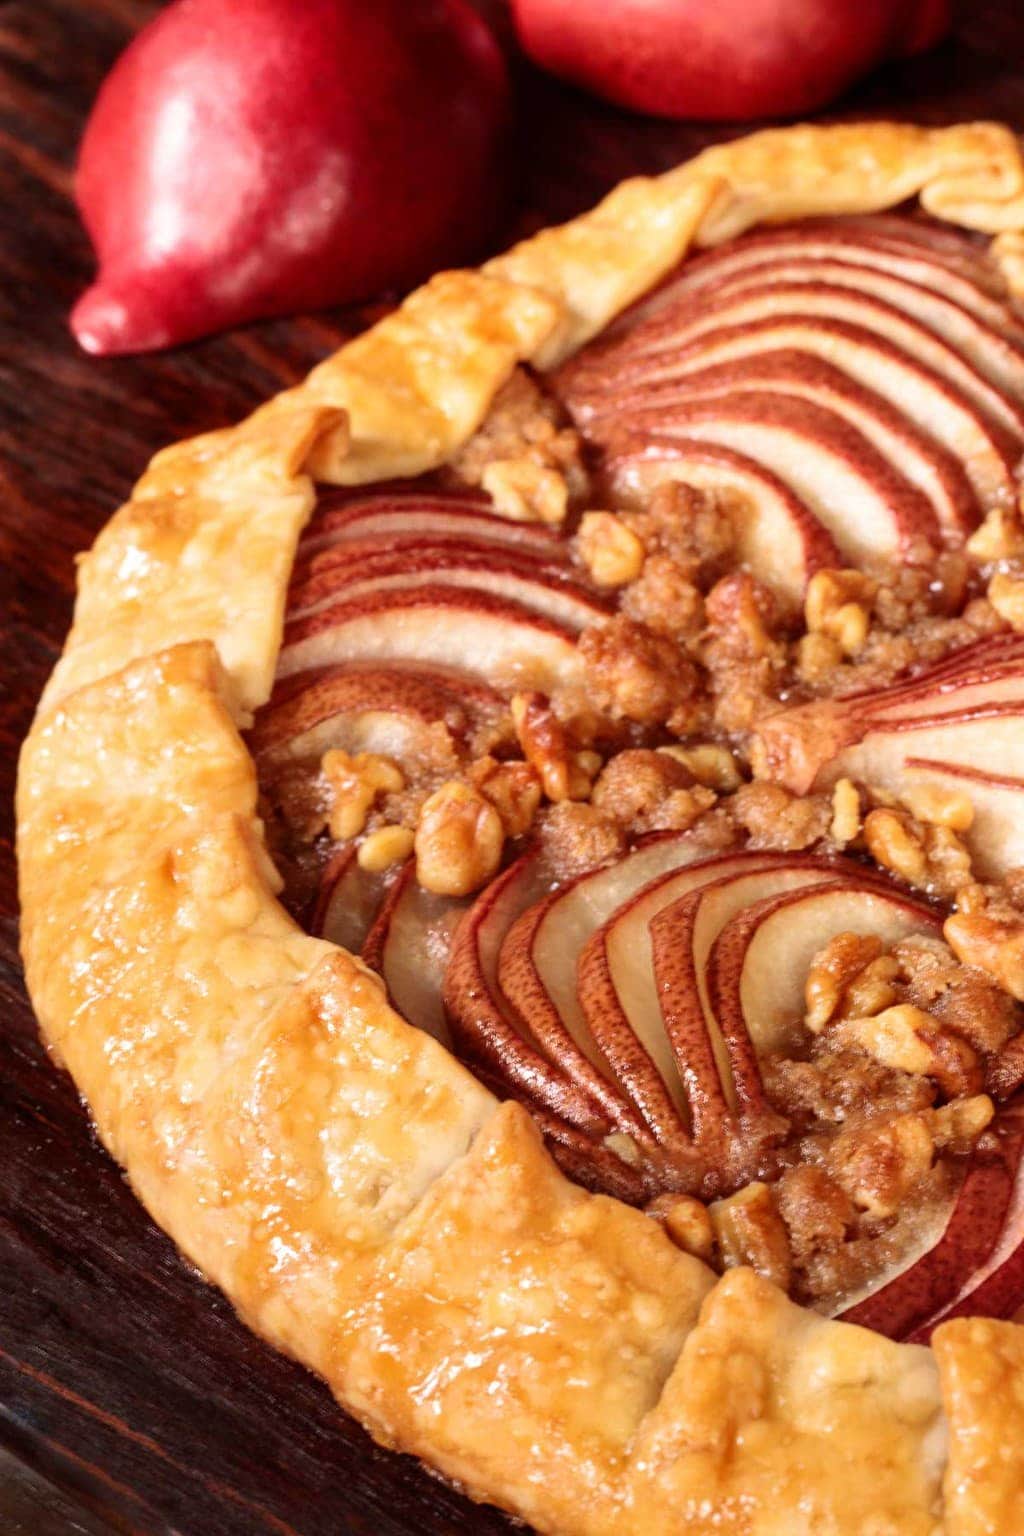 Vertical closeup photo of a Maple Glazed Red Pear Galette on a wood cutting board.